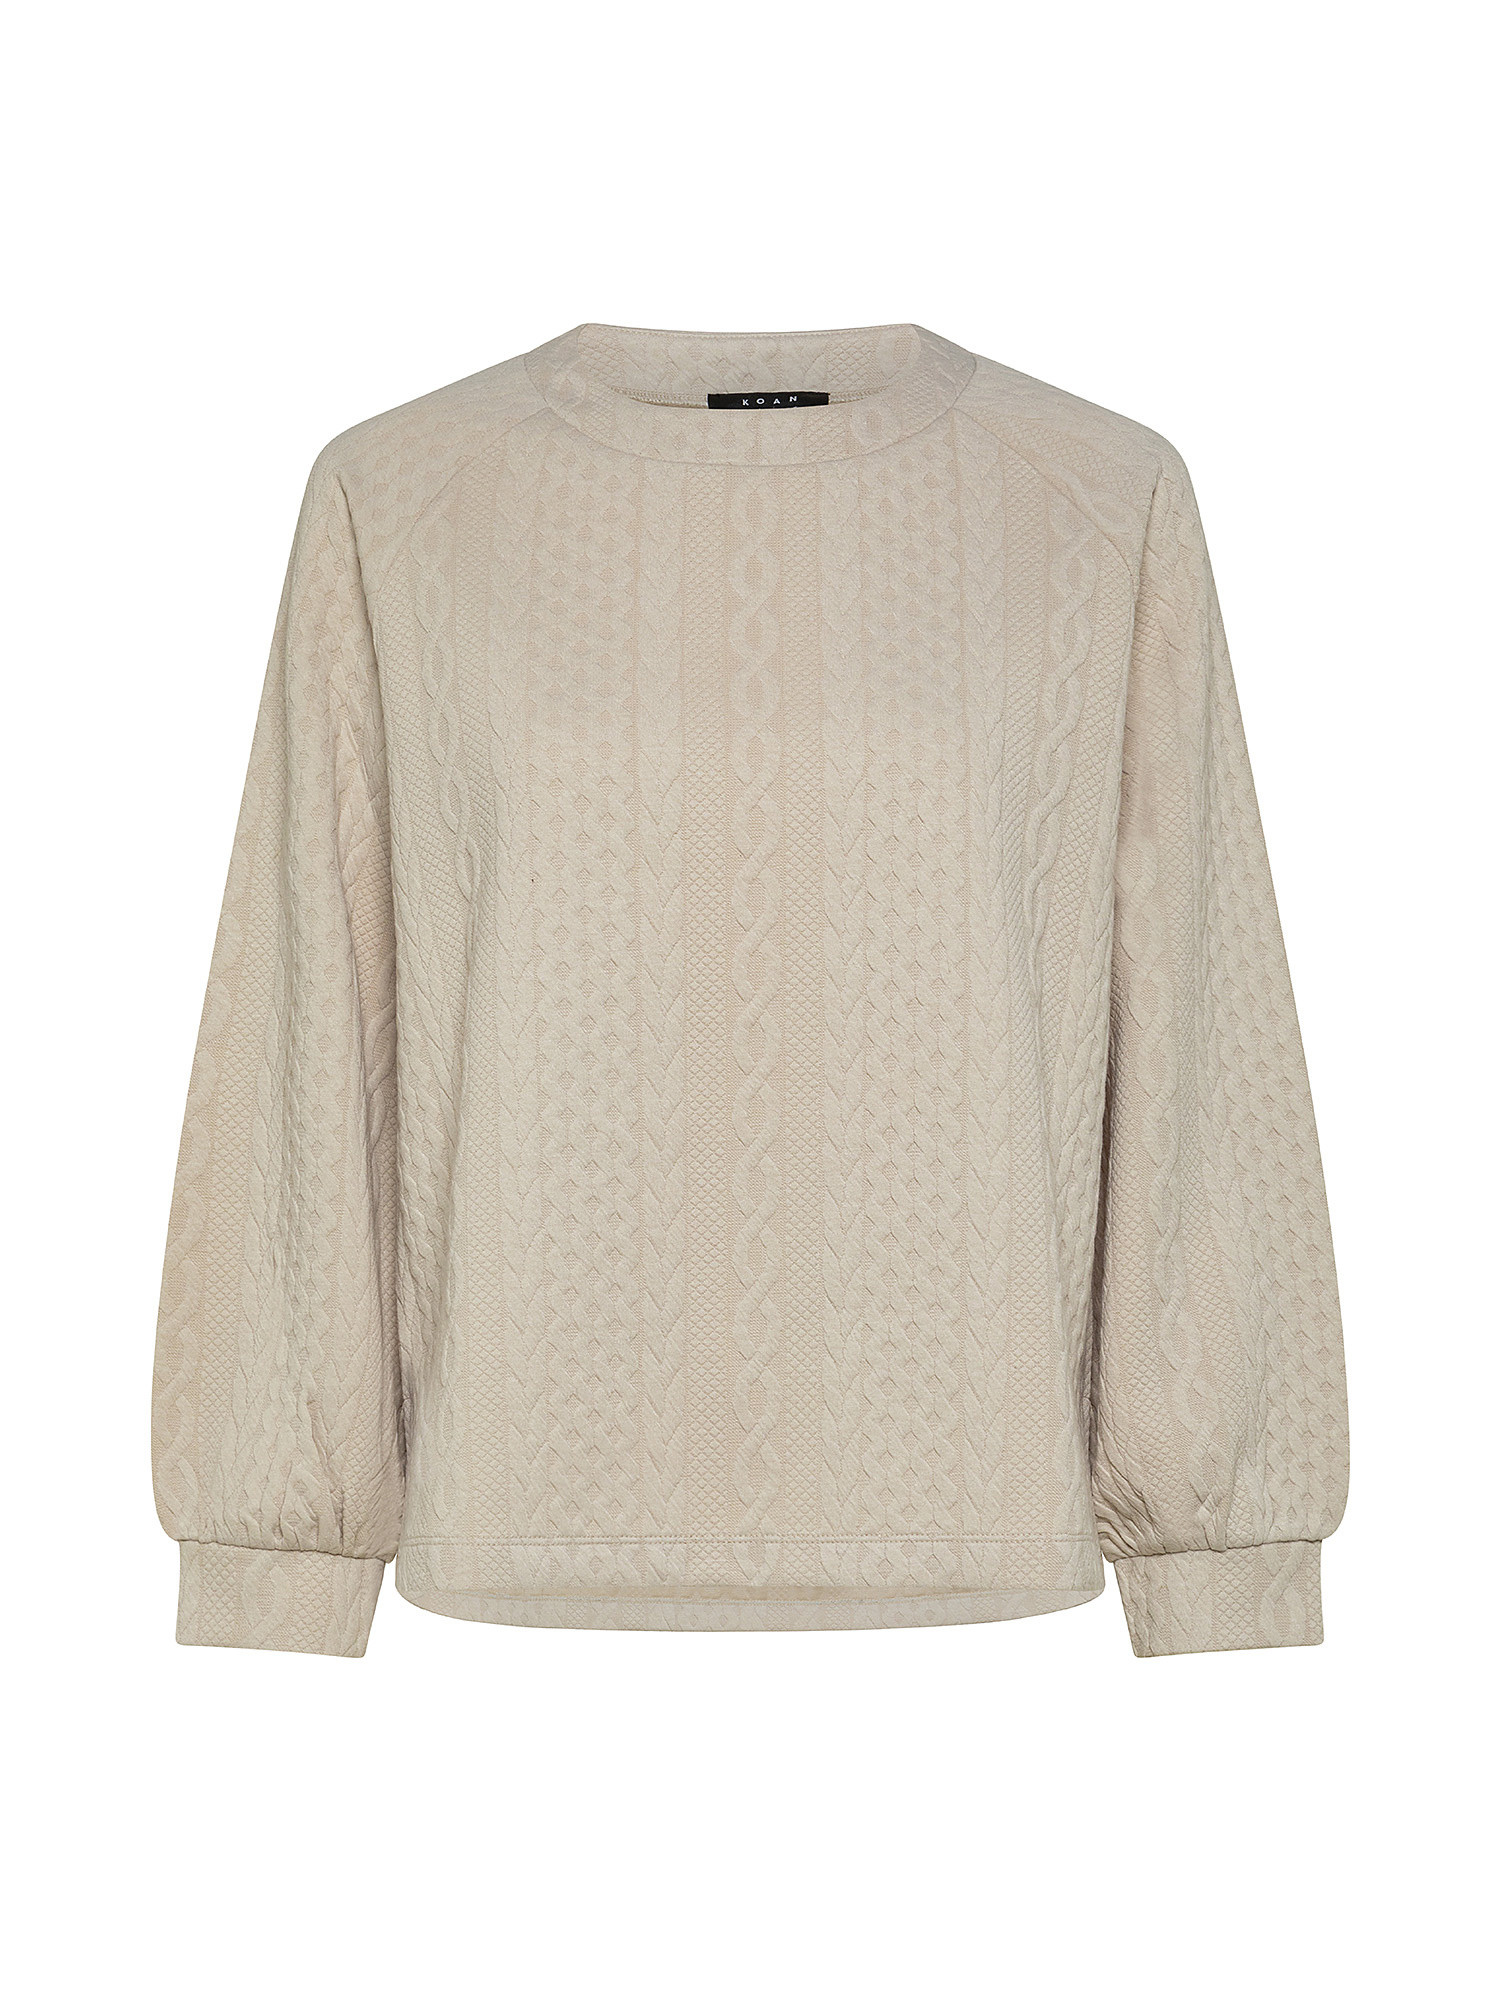 Sweater with pattern, Beige, large image number 0